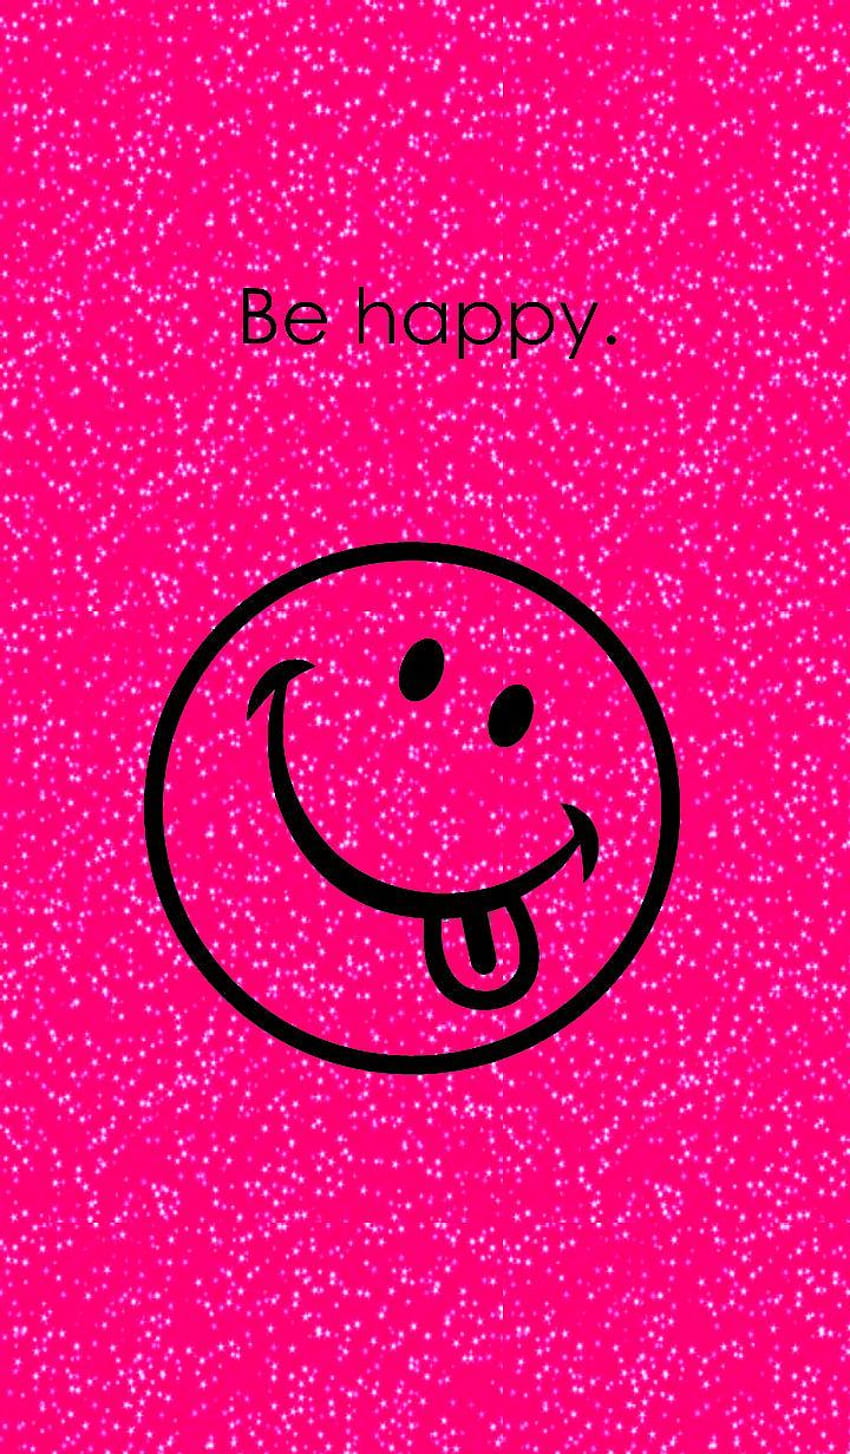 Wednesday Wallpaper: Place My Happiness - Jacob Abshire